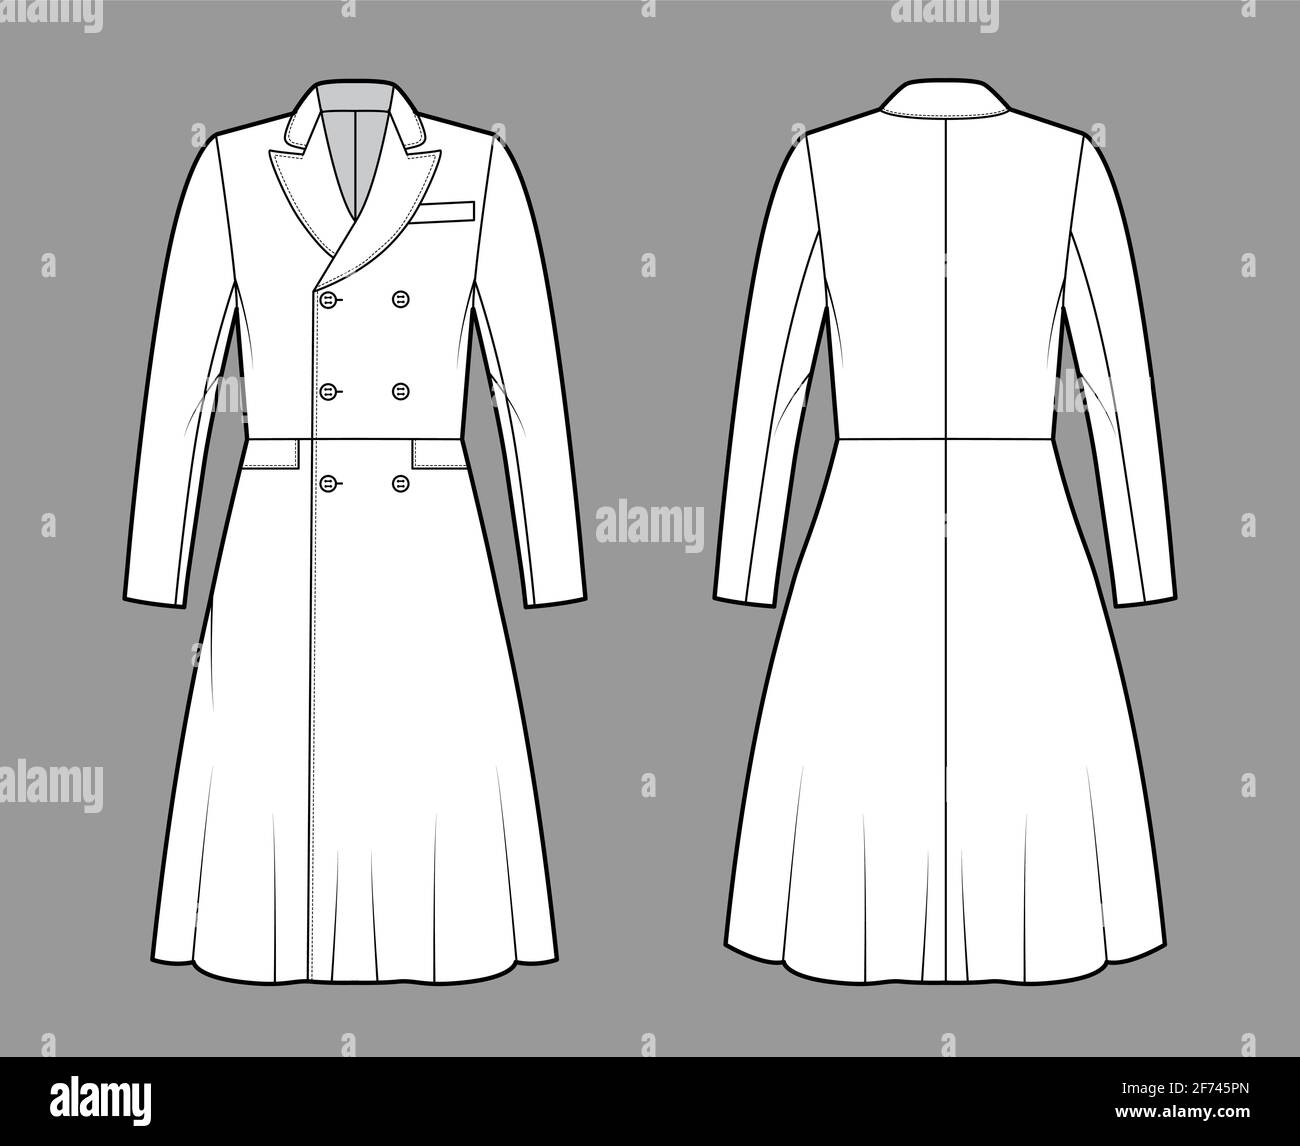 Frock coat technical fashion illustration with double breasted, long sleeves, round collar peak, knee length, A-line skirt. Flat template front, back, white color style. Women, men, unisex CAD mockup Stock Vector